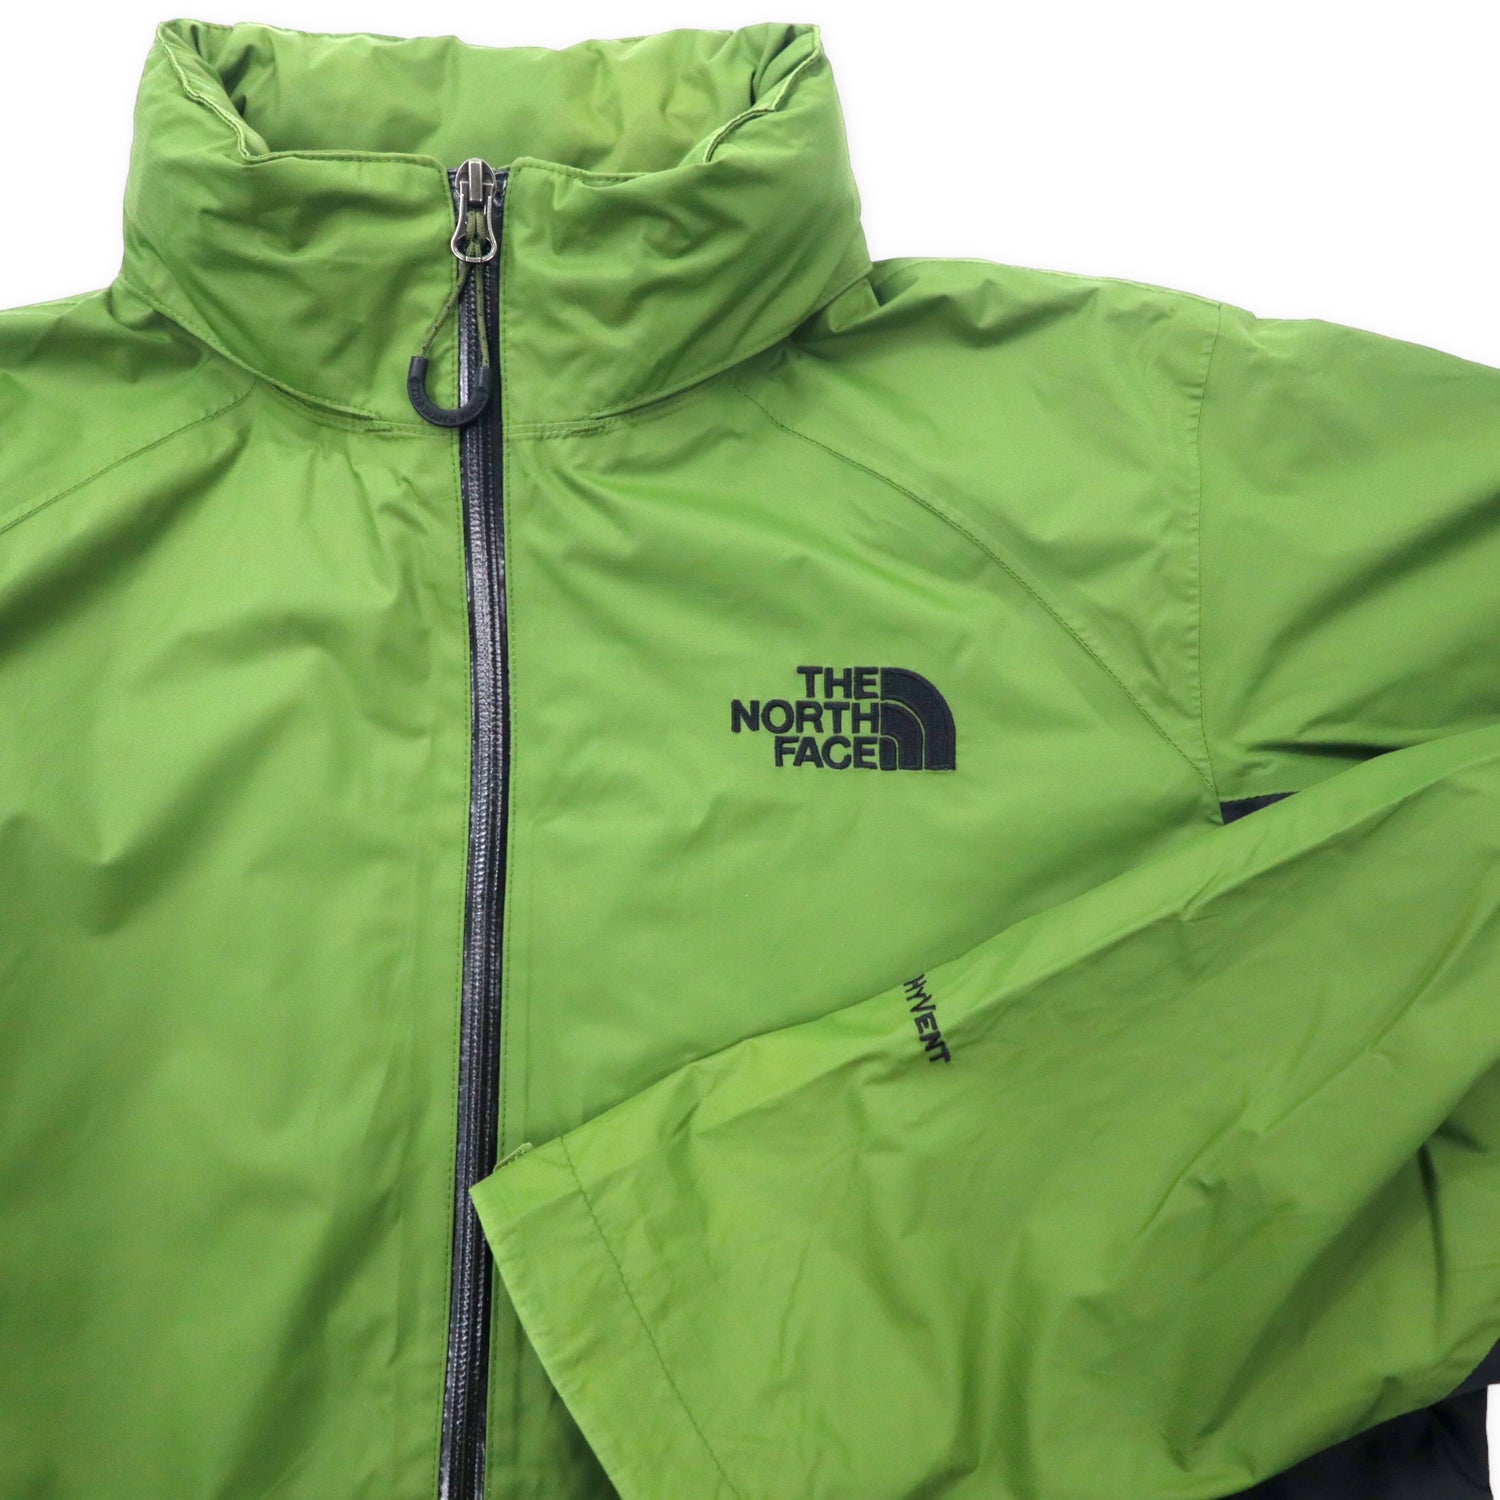 THE NORTH FACE Soft Shell Jacket Mountain HOODIE M KHAKI Nylon Water Dusp  Hoodie Storage type HYVENT moisture -permeable waterproof logo embroidery